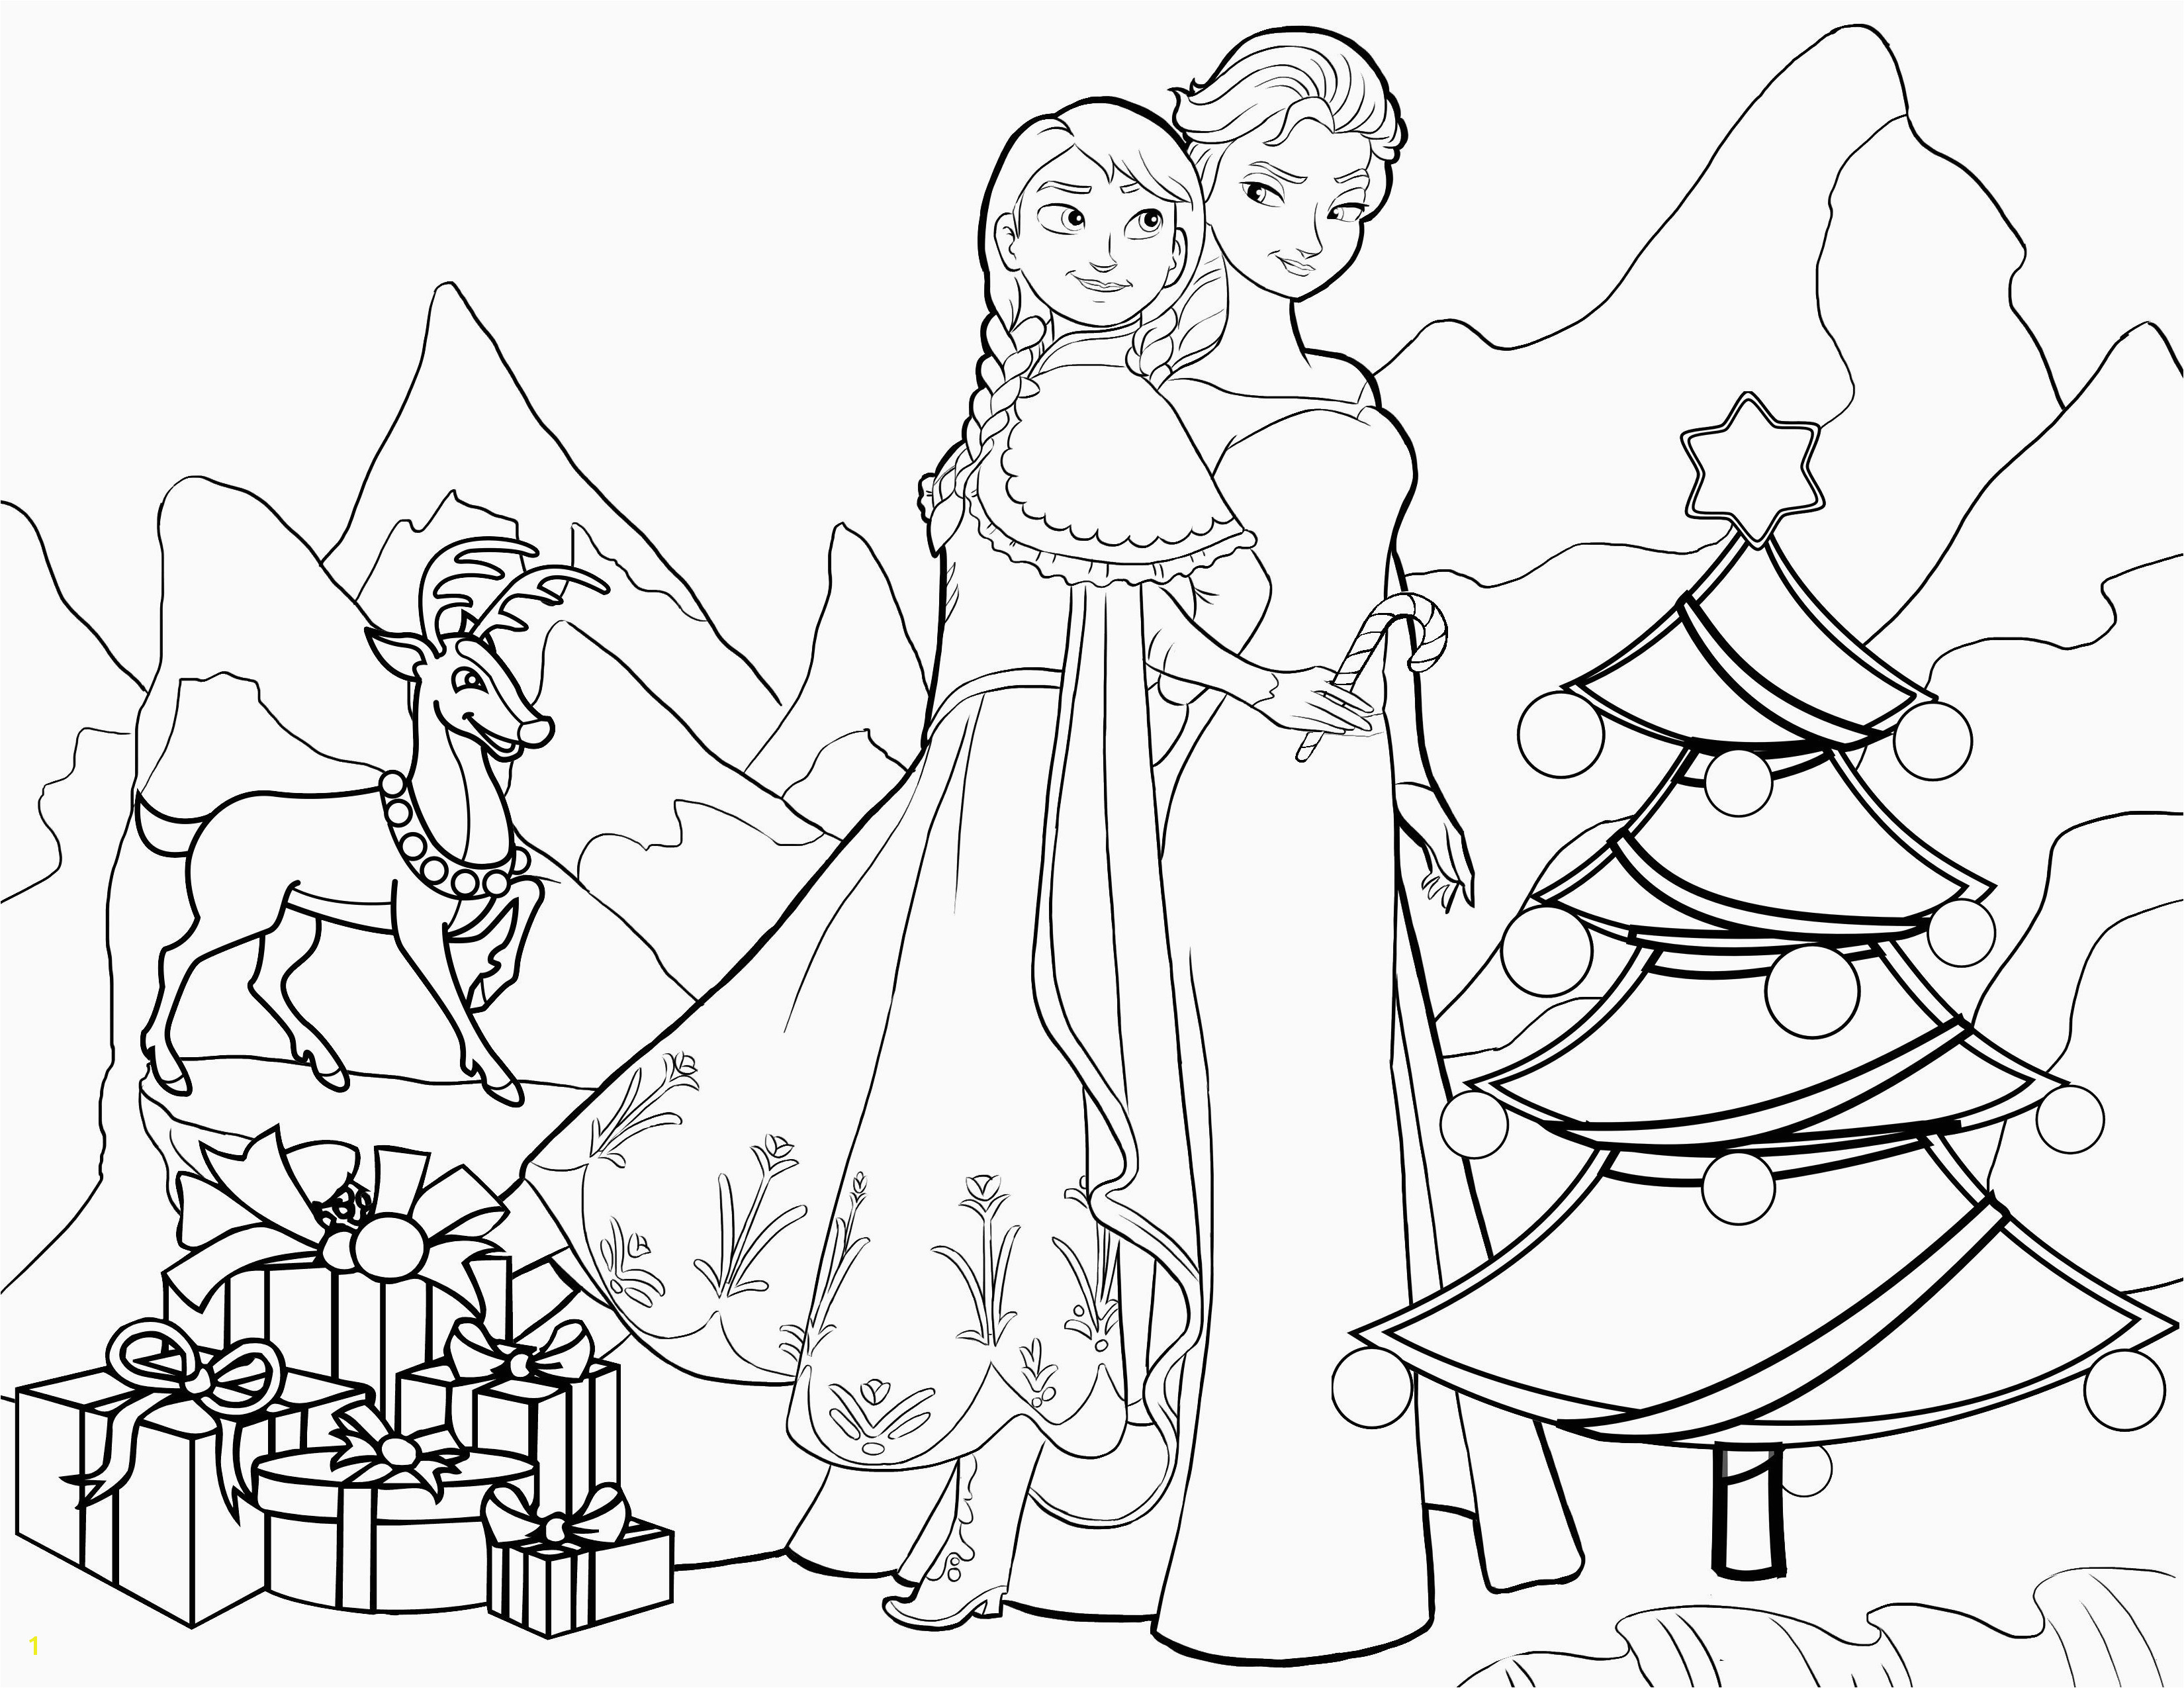 Mia and Me Coloring Pages to Print 31 Schön Ausmalbilder Mia and Me